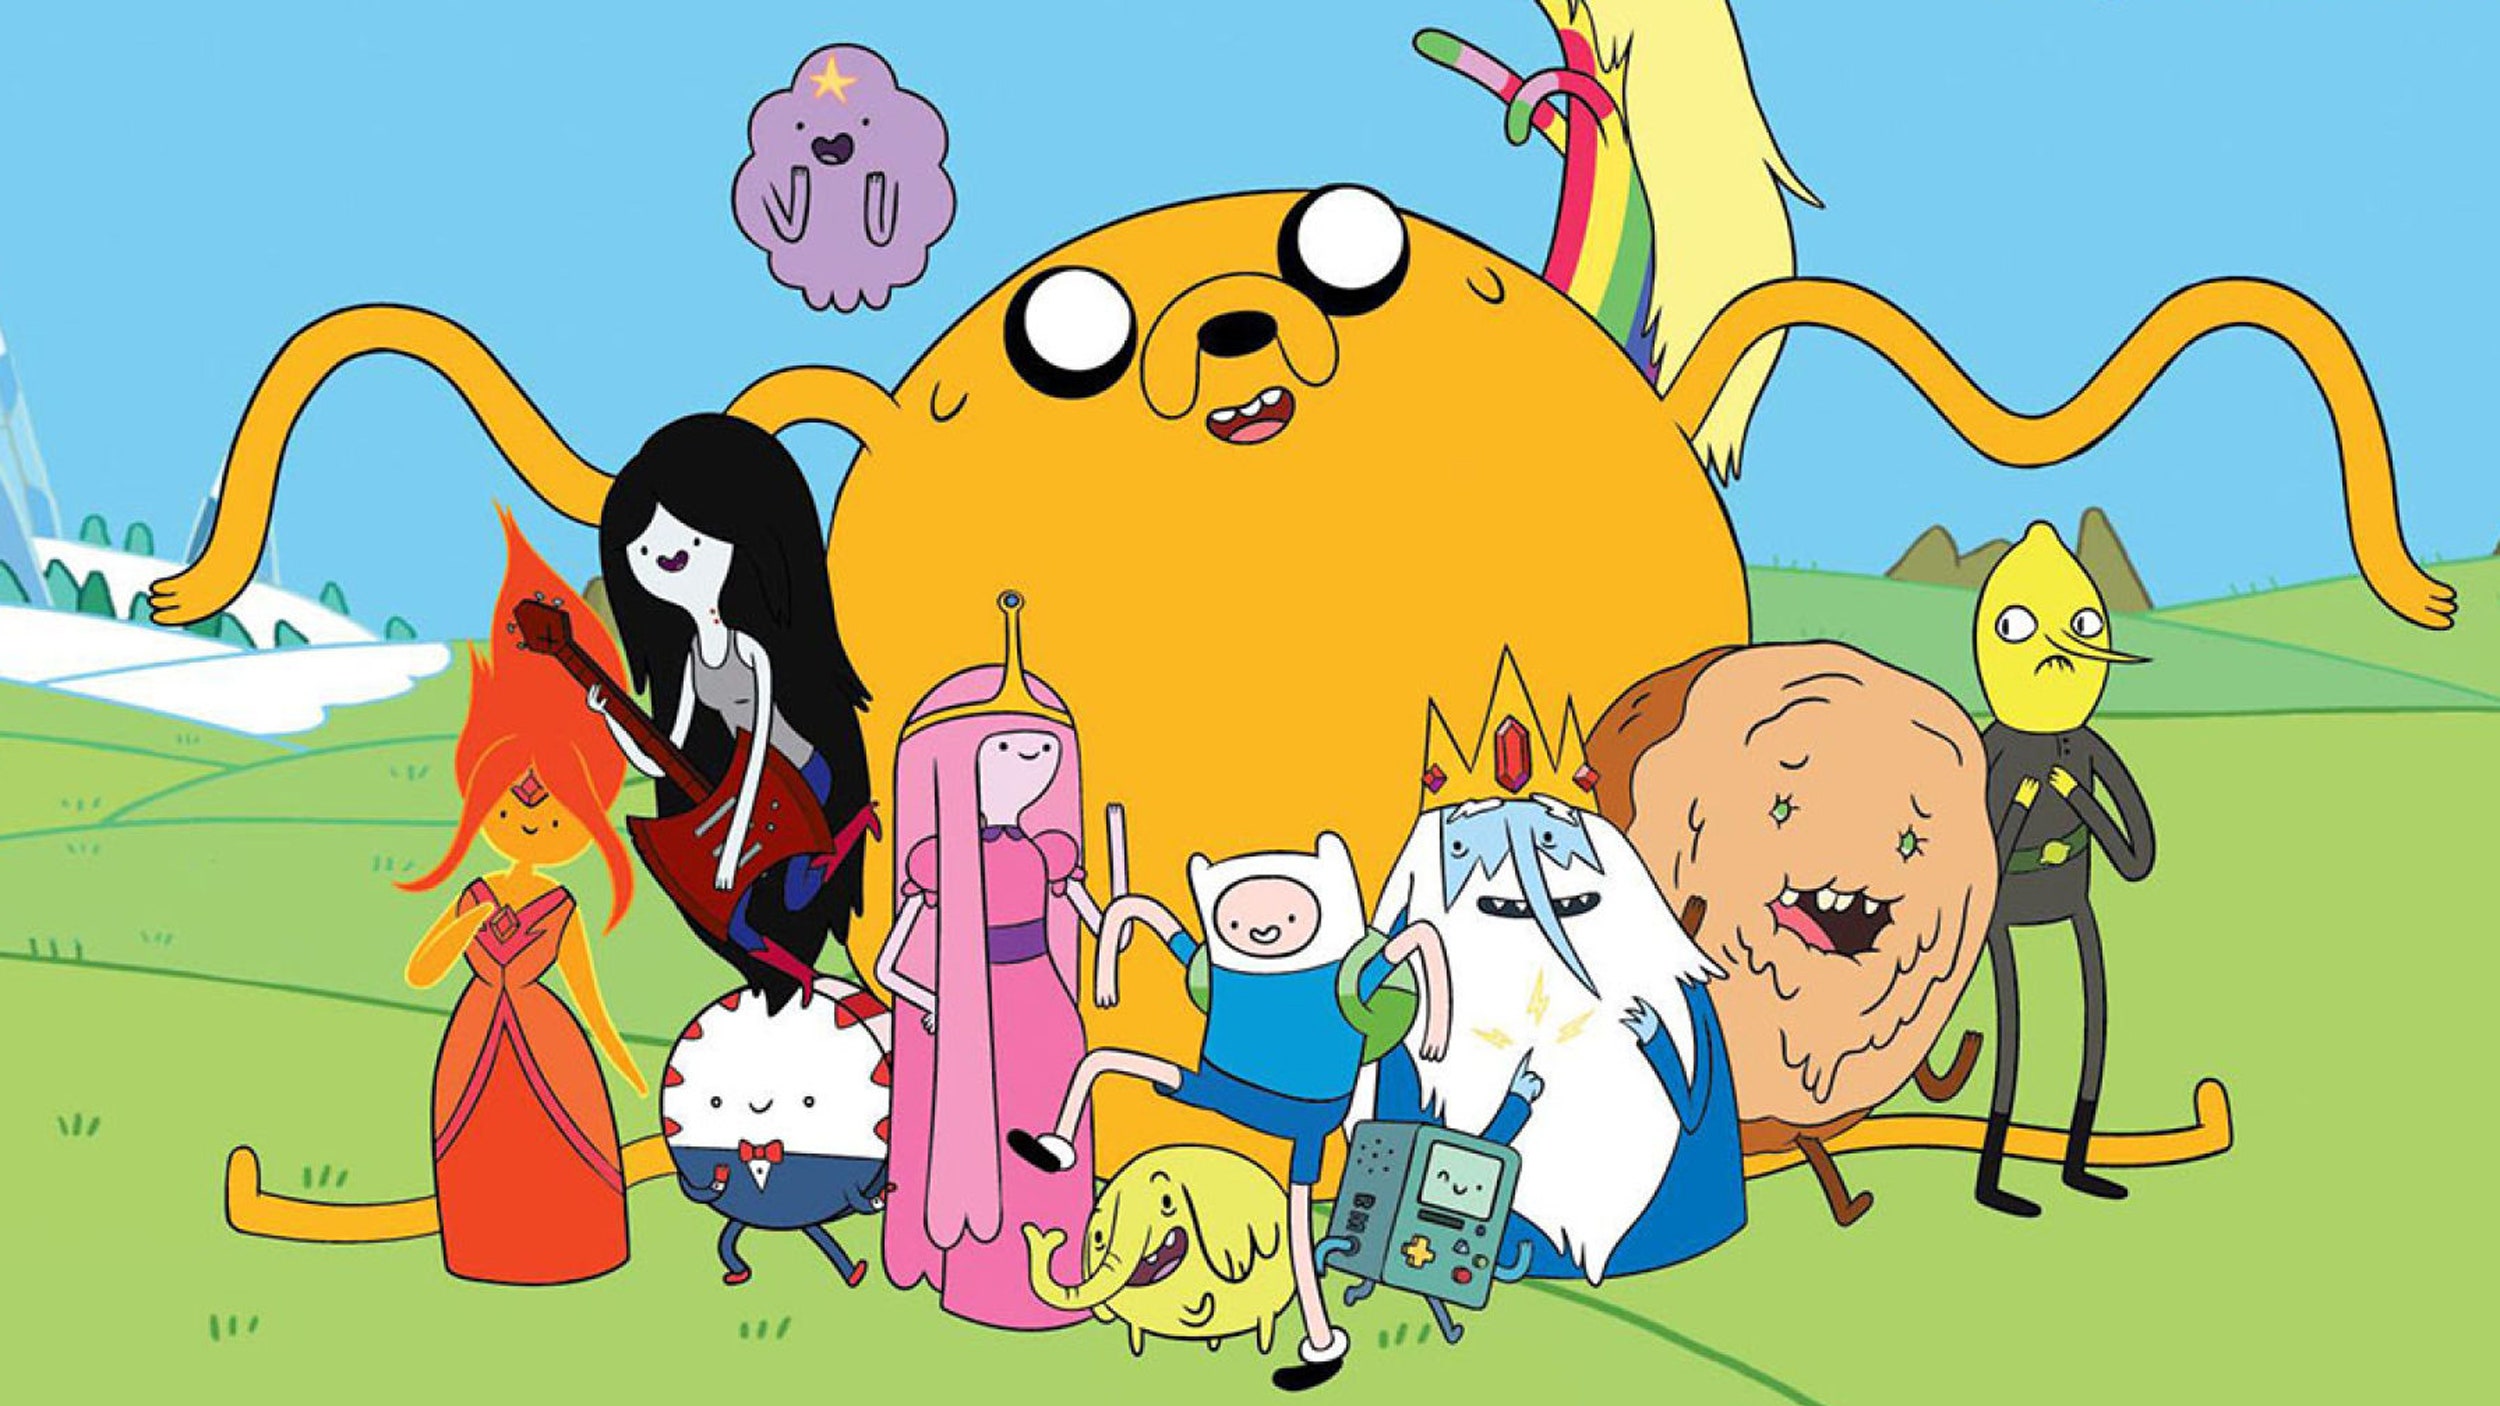 Watch 'Adventure Time' spin-off 'Fionna and Cake' trailer | EW.com